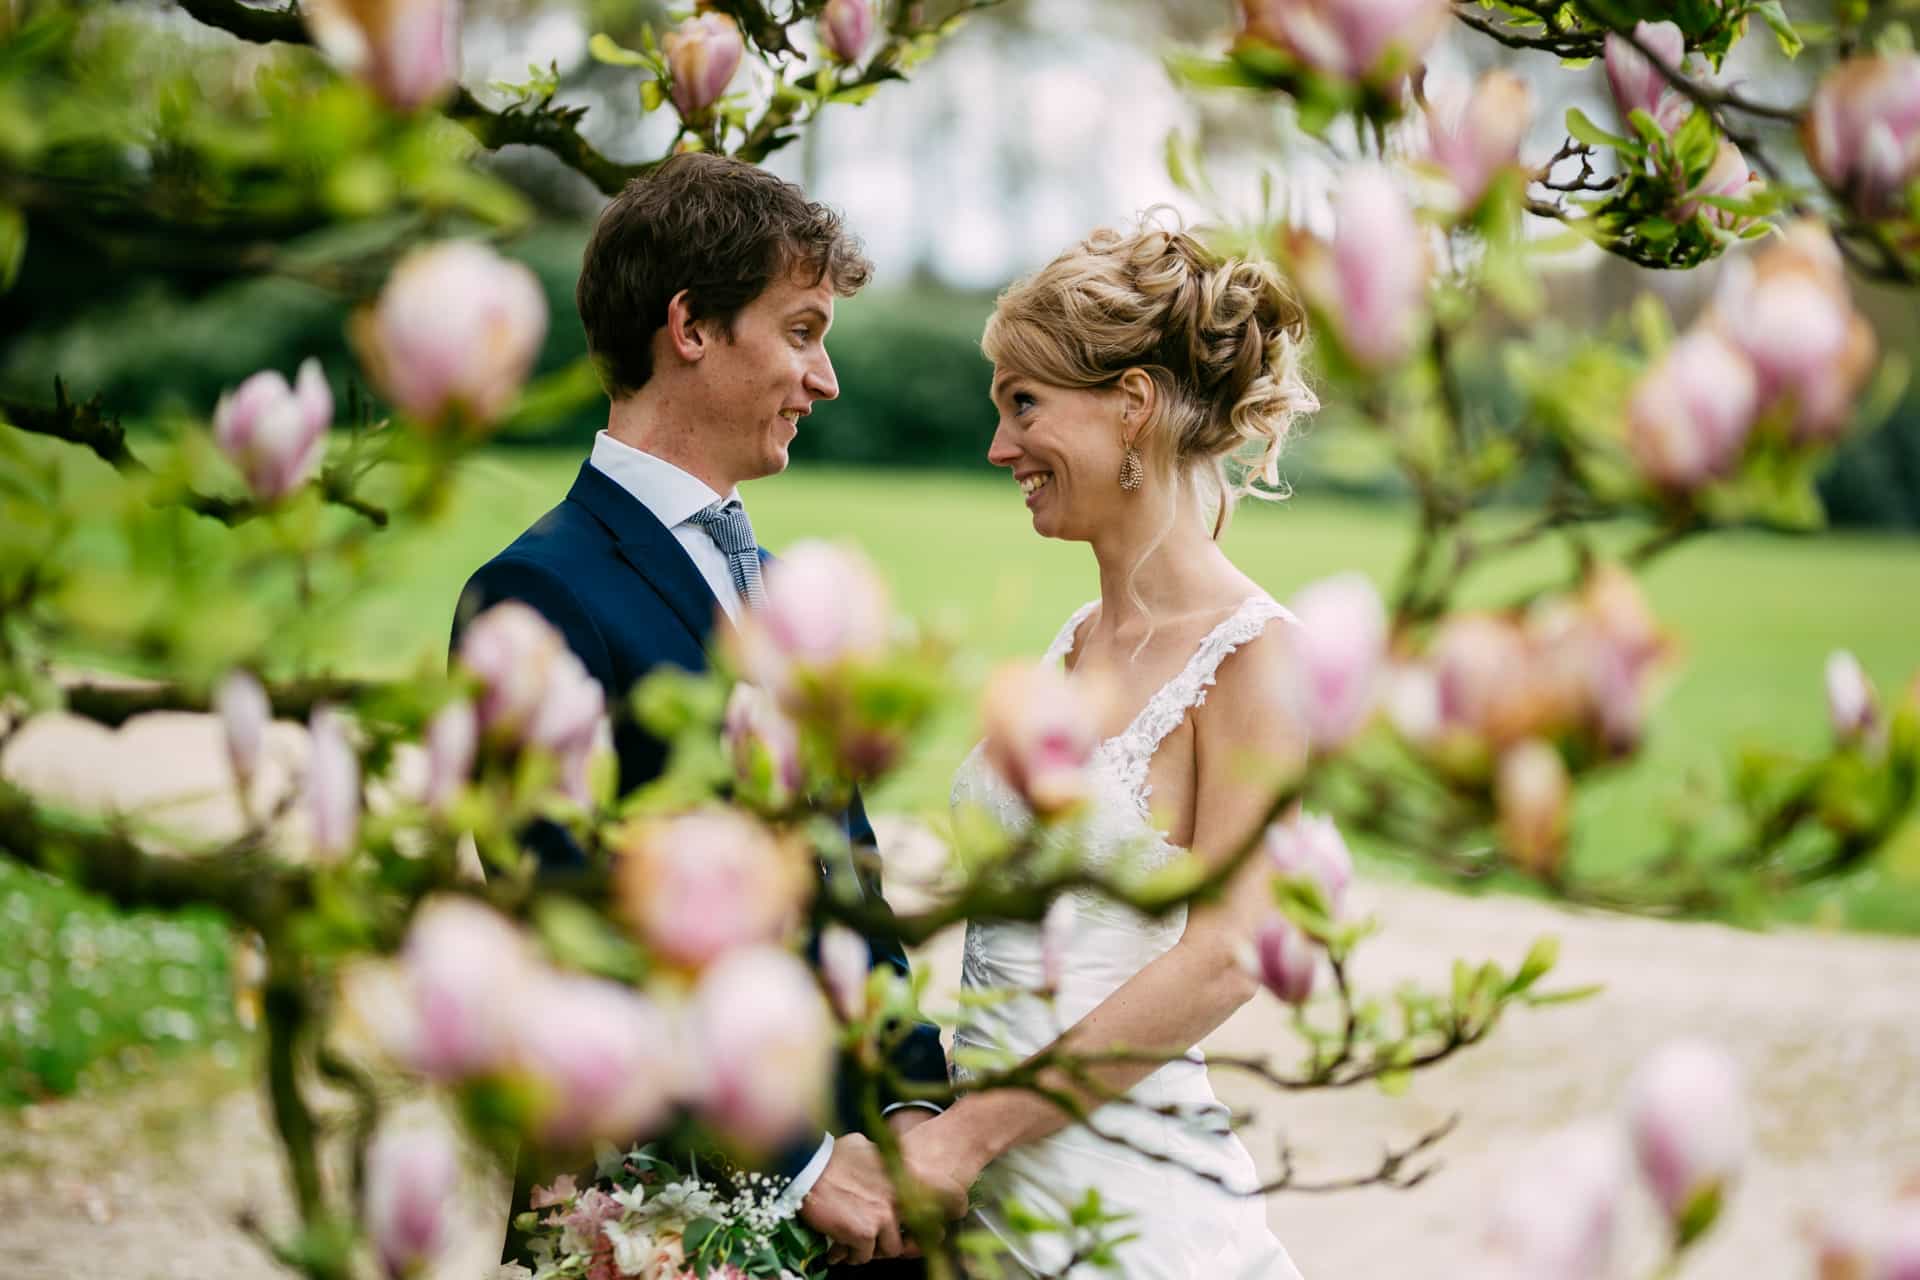 A bride and groom stand under a magnolia tree, creating a beautiful wedding-themed atmosphere.